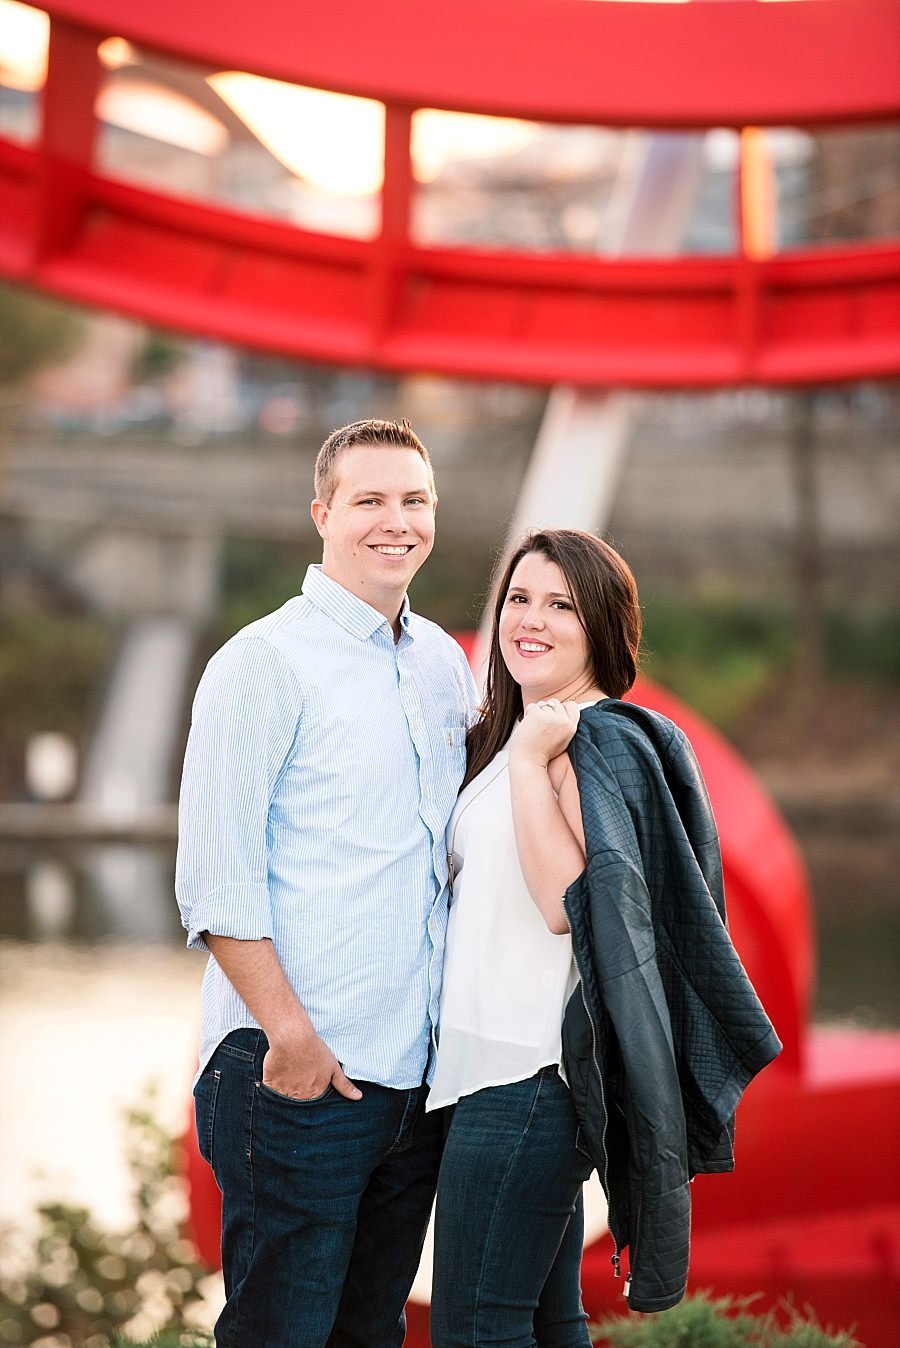 Couple standing in front of red structure artwork and Cumberland River, he's wearing a blue dress shirt and she has a leather jacket over her shoulder